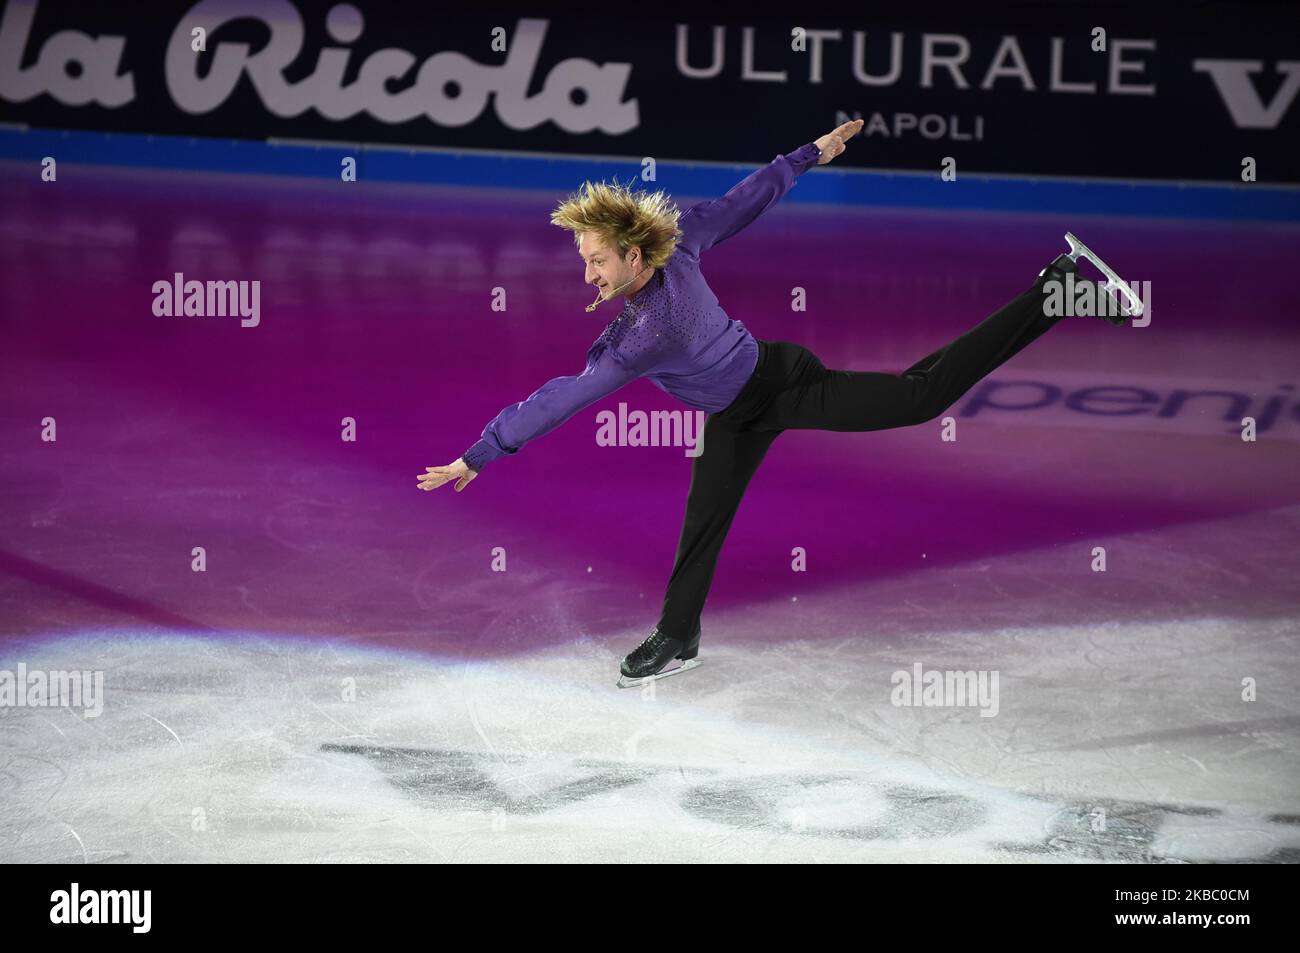 Russian skater Evgini Plushenko skating during the Golden Skate Gala, an annual event that brings together the best skaters in the world in an evening of absolute show that this year was held on November 30, 2019 at the Allianz Cloud in Milan, Italy. (Photo by Andrea Diodato/NurPhoto) Stock Photo